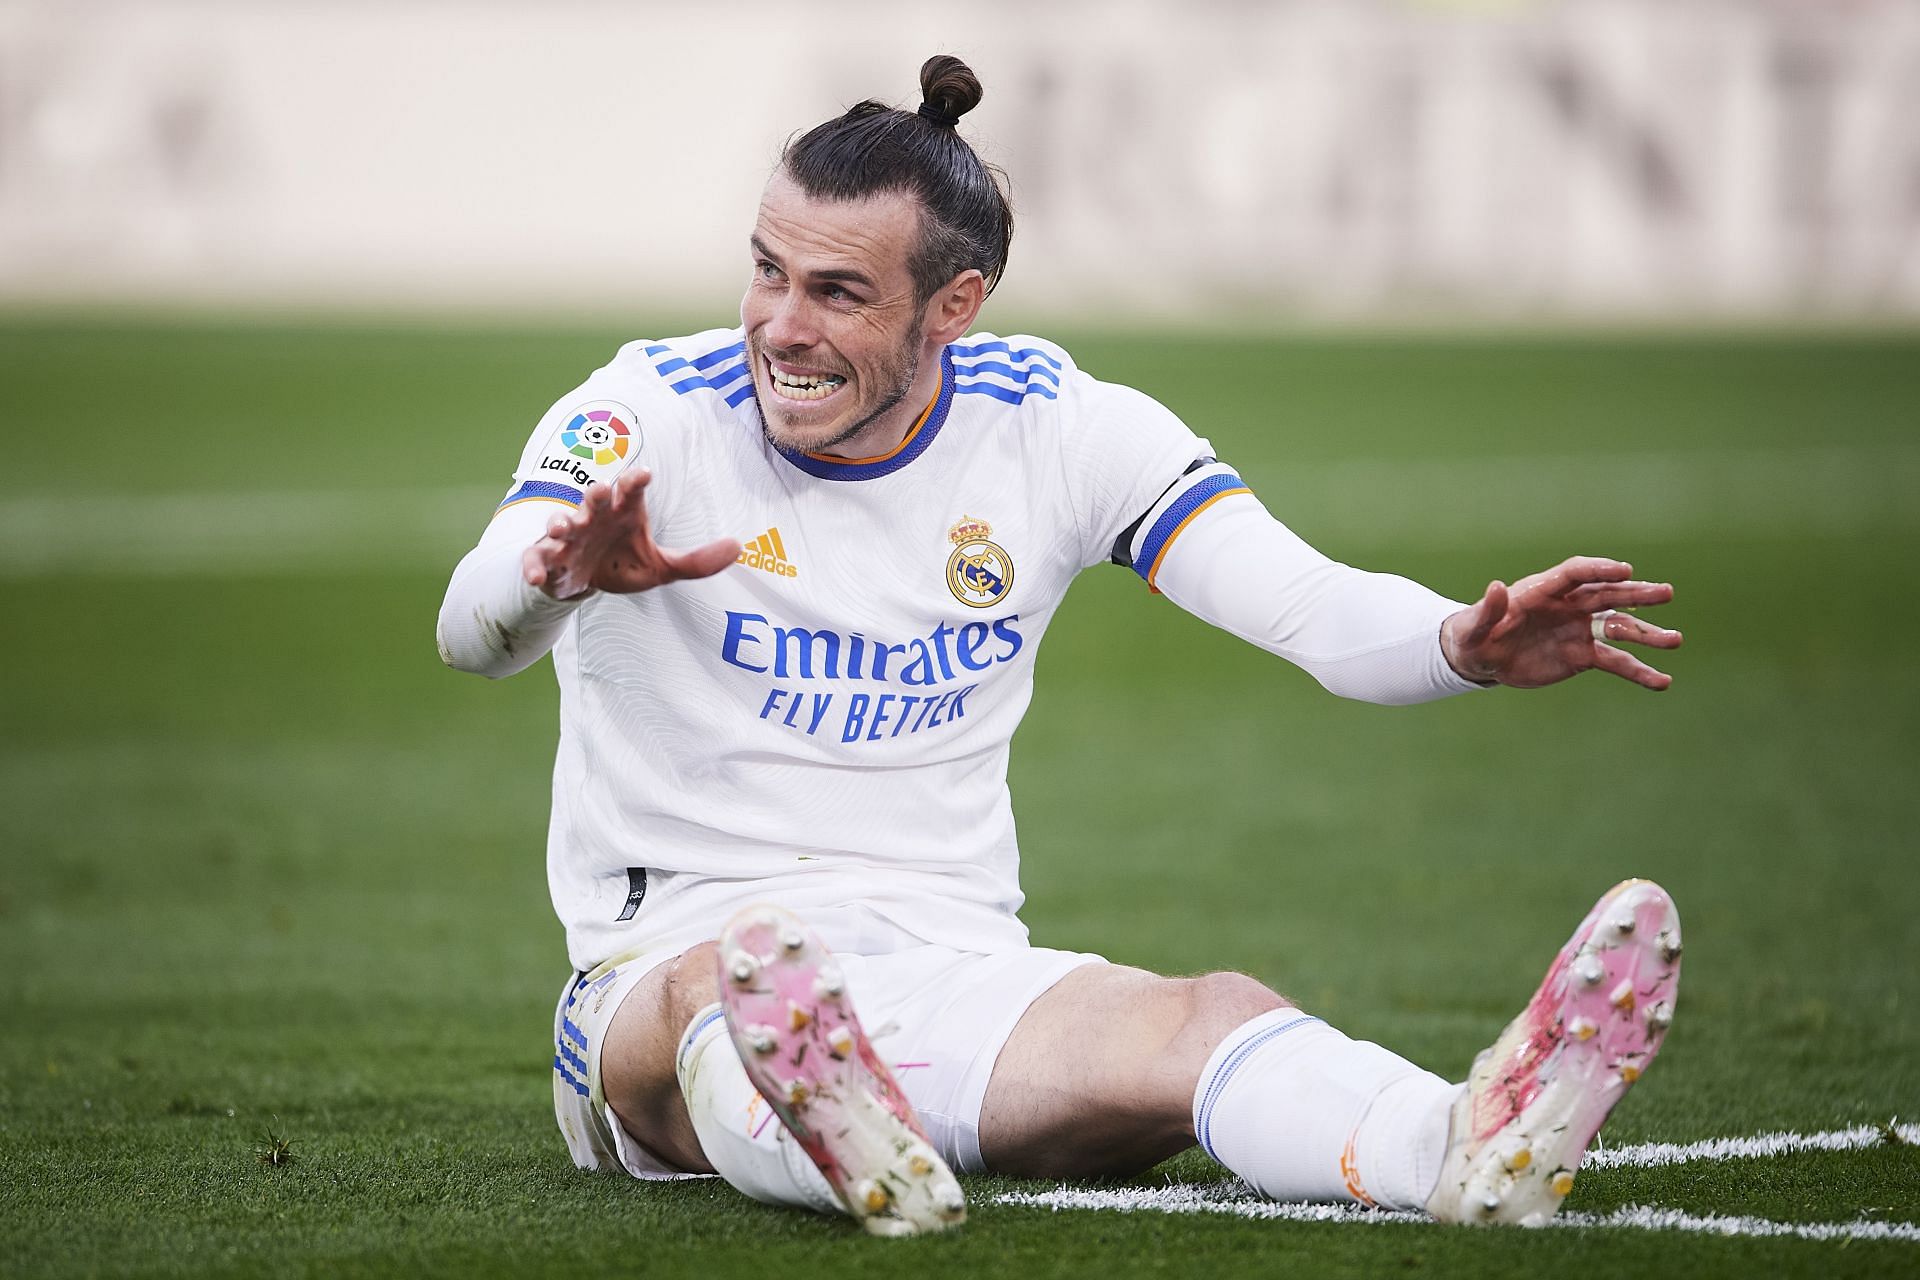 Bale has rarely featured this season